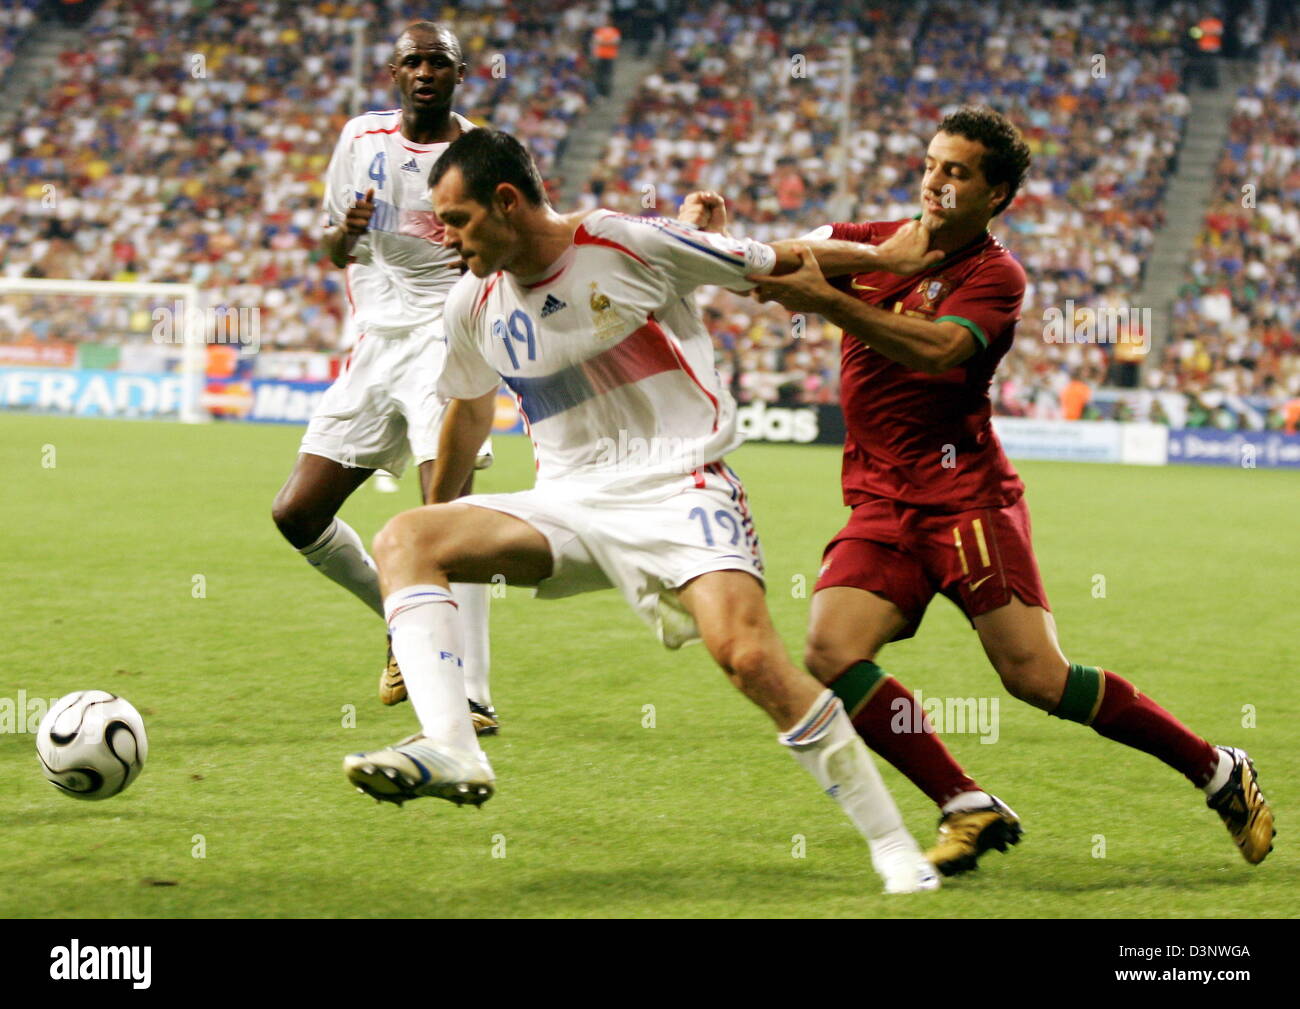 Simao Sabrosa of Portugal (R) tries to stop French Willy Sagnol during the semi final match of the 2006 FIFA World Cup between Portugal and France in Munich, Germany, Wednesday 05 July 2006. Photo: MATTHIAS SCHRADER +++ Mobile Services OUT +++ Please refer to FIFA's terms and conditions Stock Photo